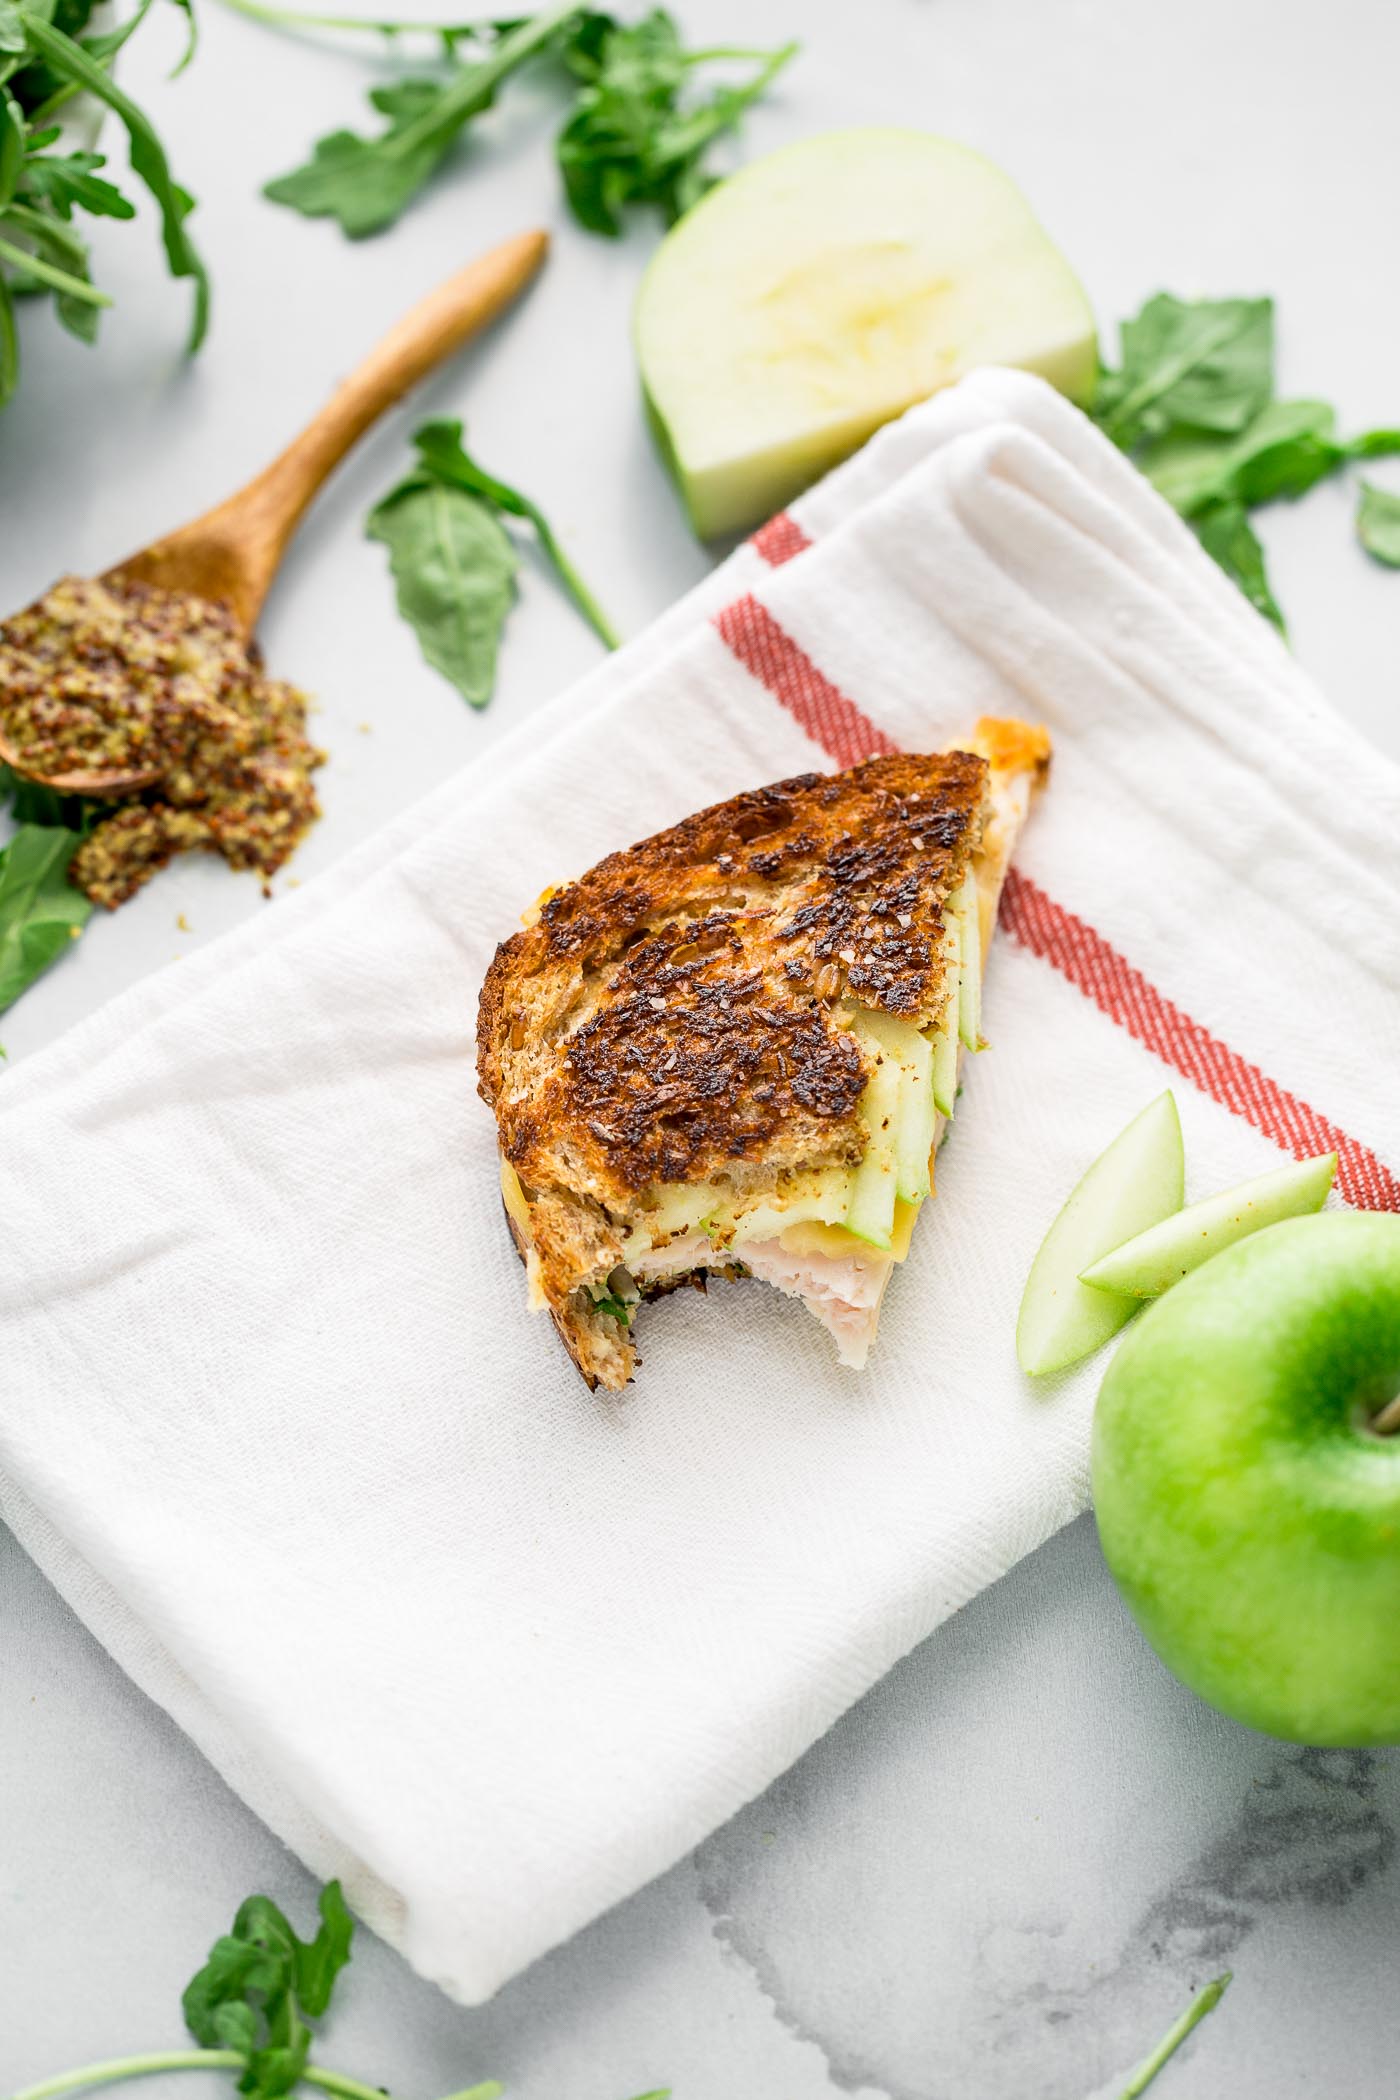 autumn grilled cheese sandwiches stuffed with fall flavor! hearty whole-grain bread slathered in whole grain mustard & sandwiched around melty gouda, smoked turkey, & crisp granny smith apples. the only thing missing is a big dunk into a bowl of tomato soup! #playswellwithbutter #comfortfood #grilledcheese #grannysmith